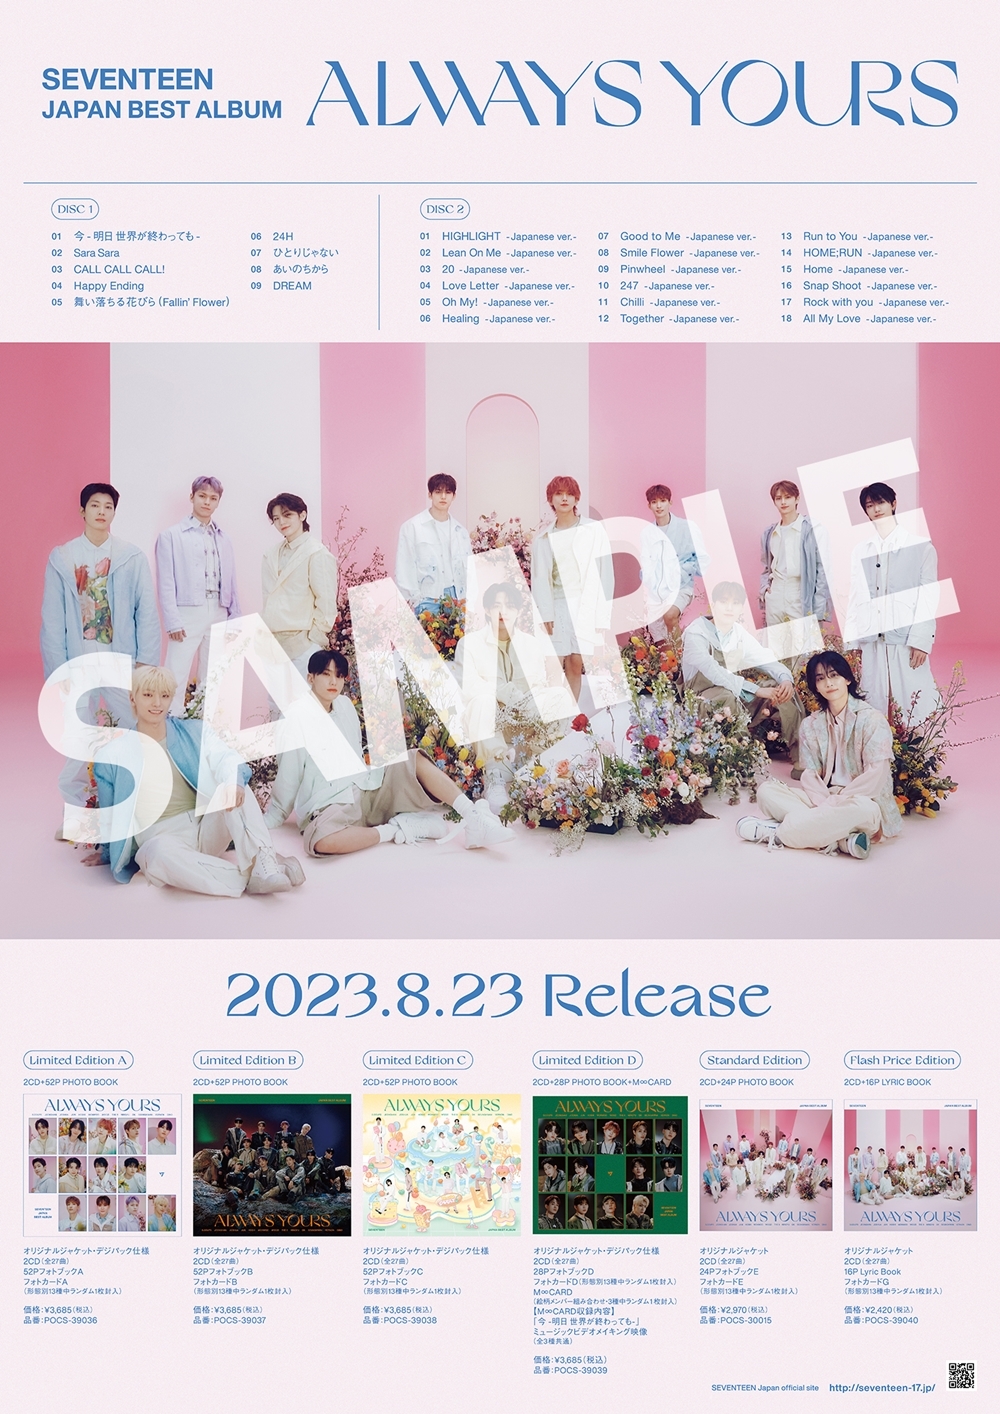 SEVENTEEN ALWAYS YOURS HMV ラキドロ エスクプス - タレントグッズ